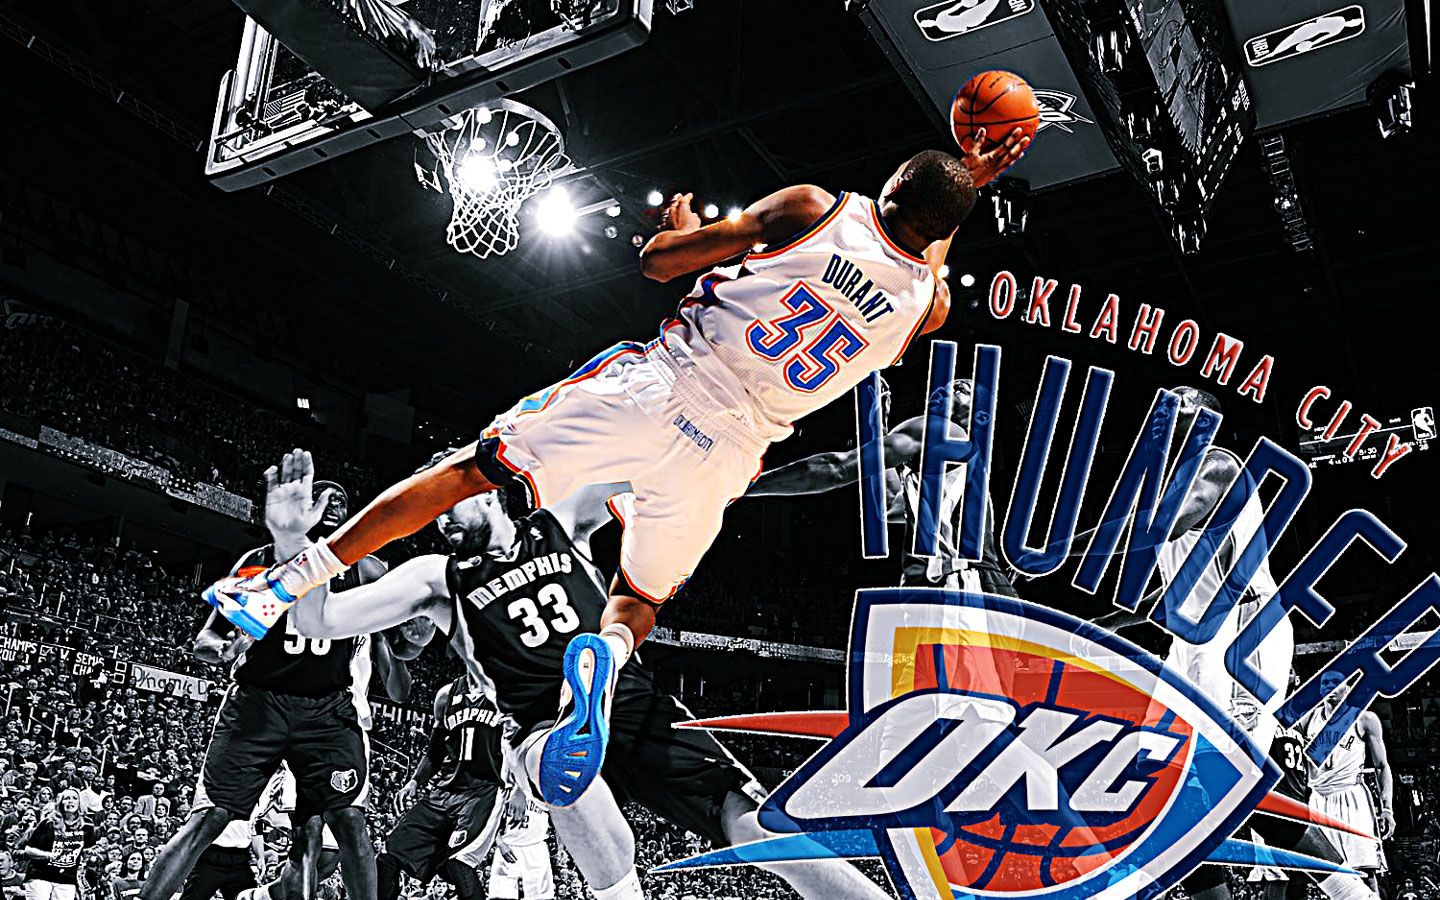 Kevin Durant Wallpapers 2015 HD - Wallpaper Cave